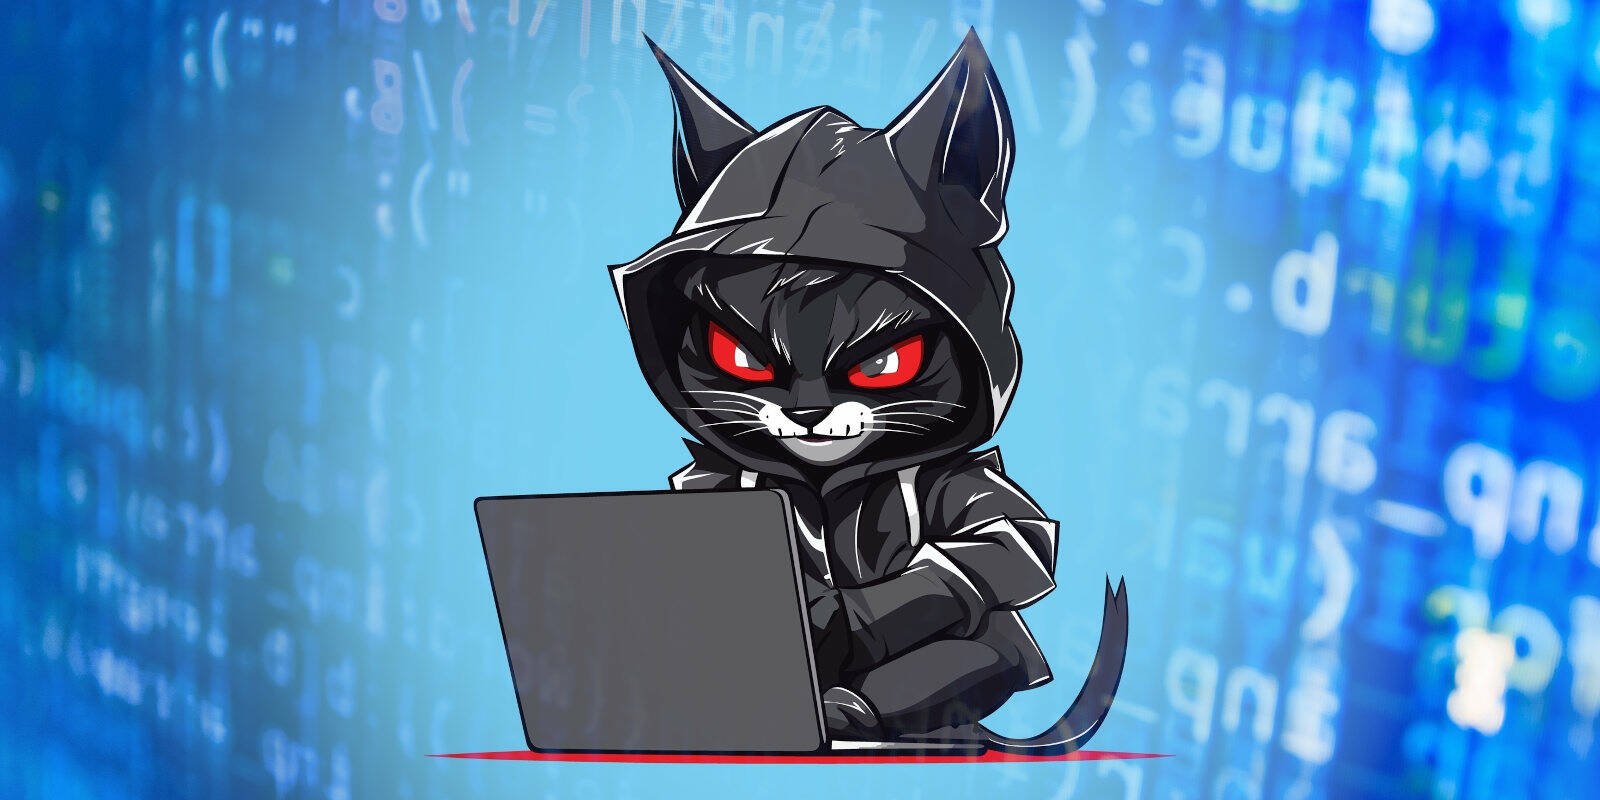 FYI: There’s another BlackCat ransomware variant on the prowl – Source: go.theregister.com